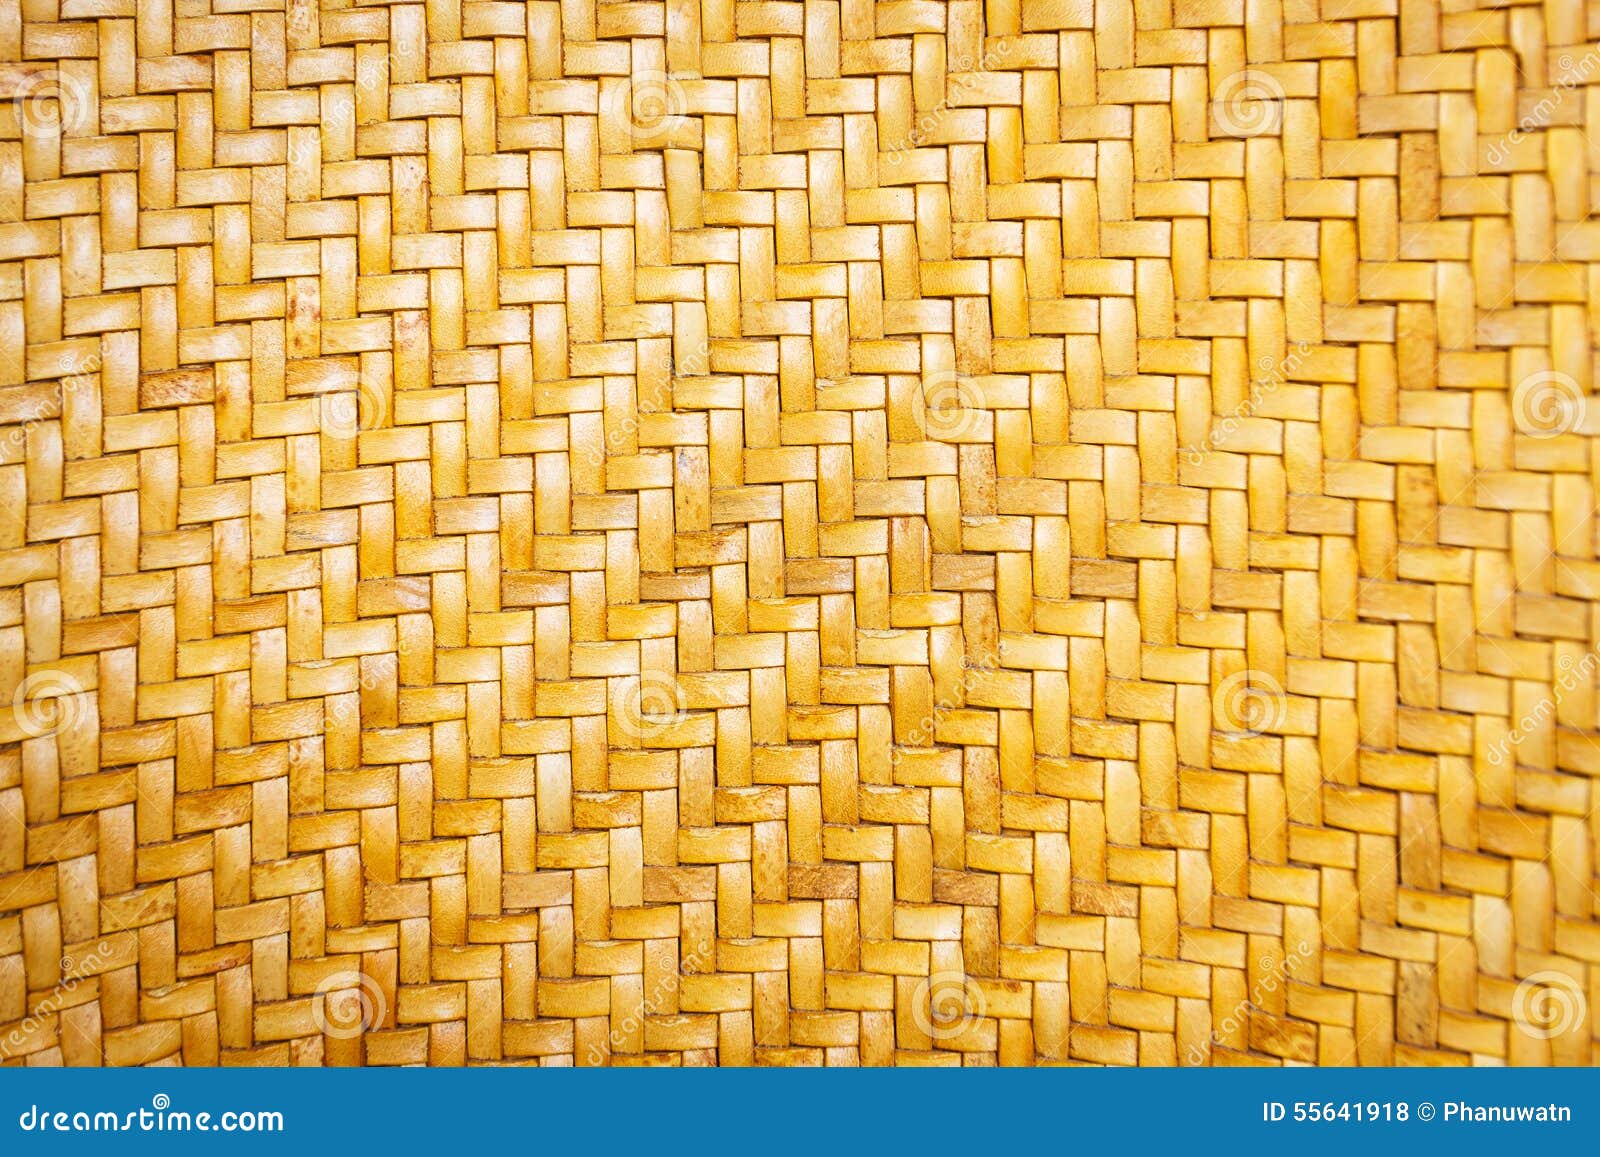 2,243 Braided Leather Texture Royalty-Free Images, Stock Photos & Pictures